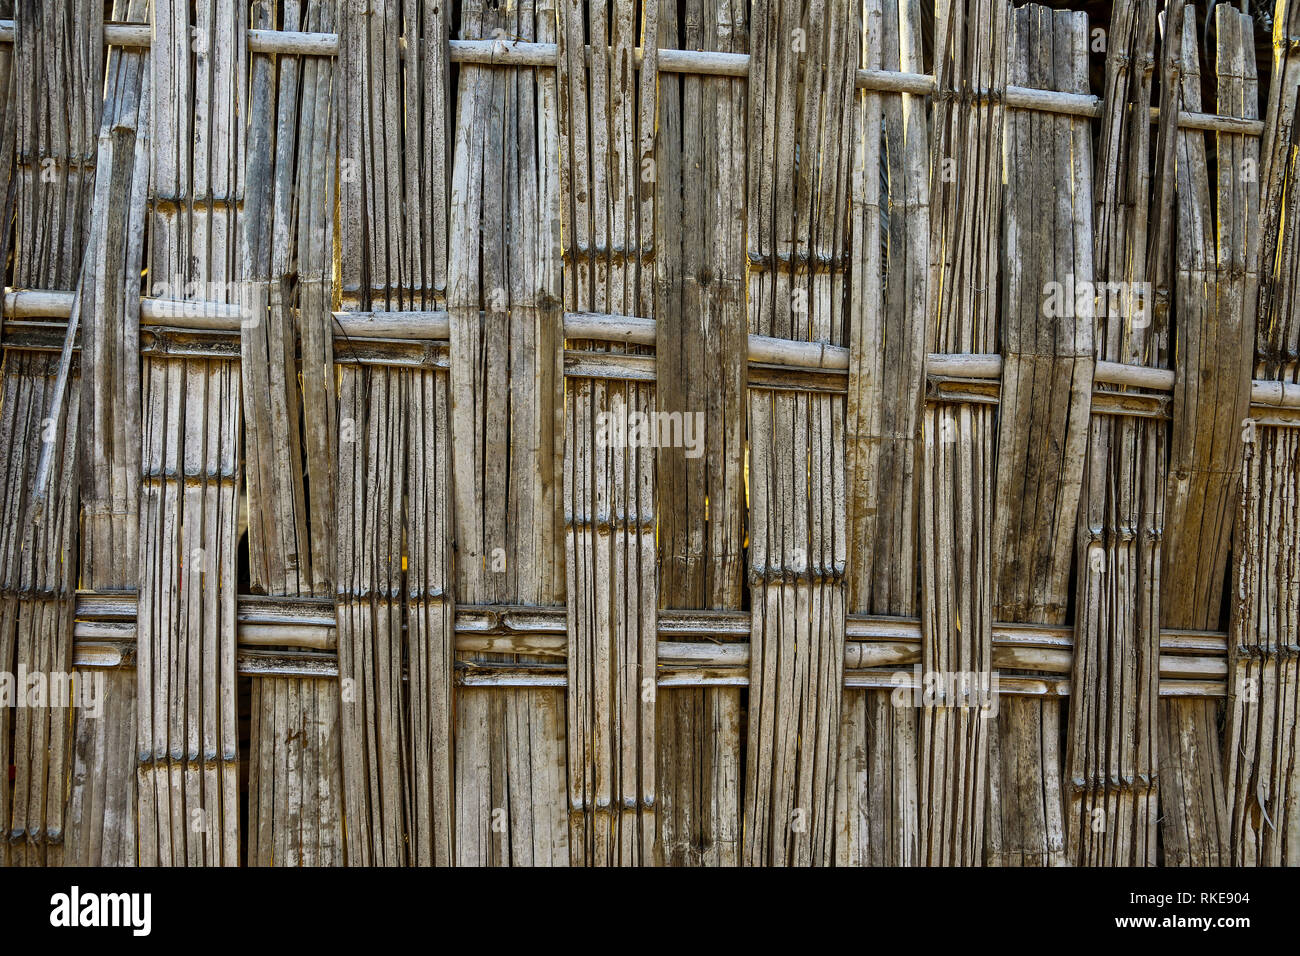 use of bamboo as a building material and a pleasant background Stock Photo  - Alamy